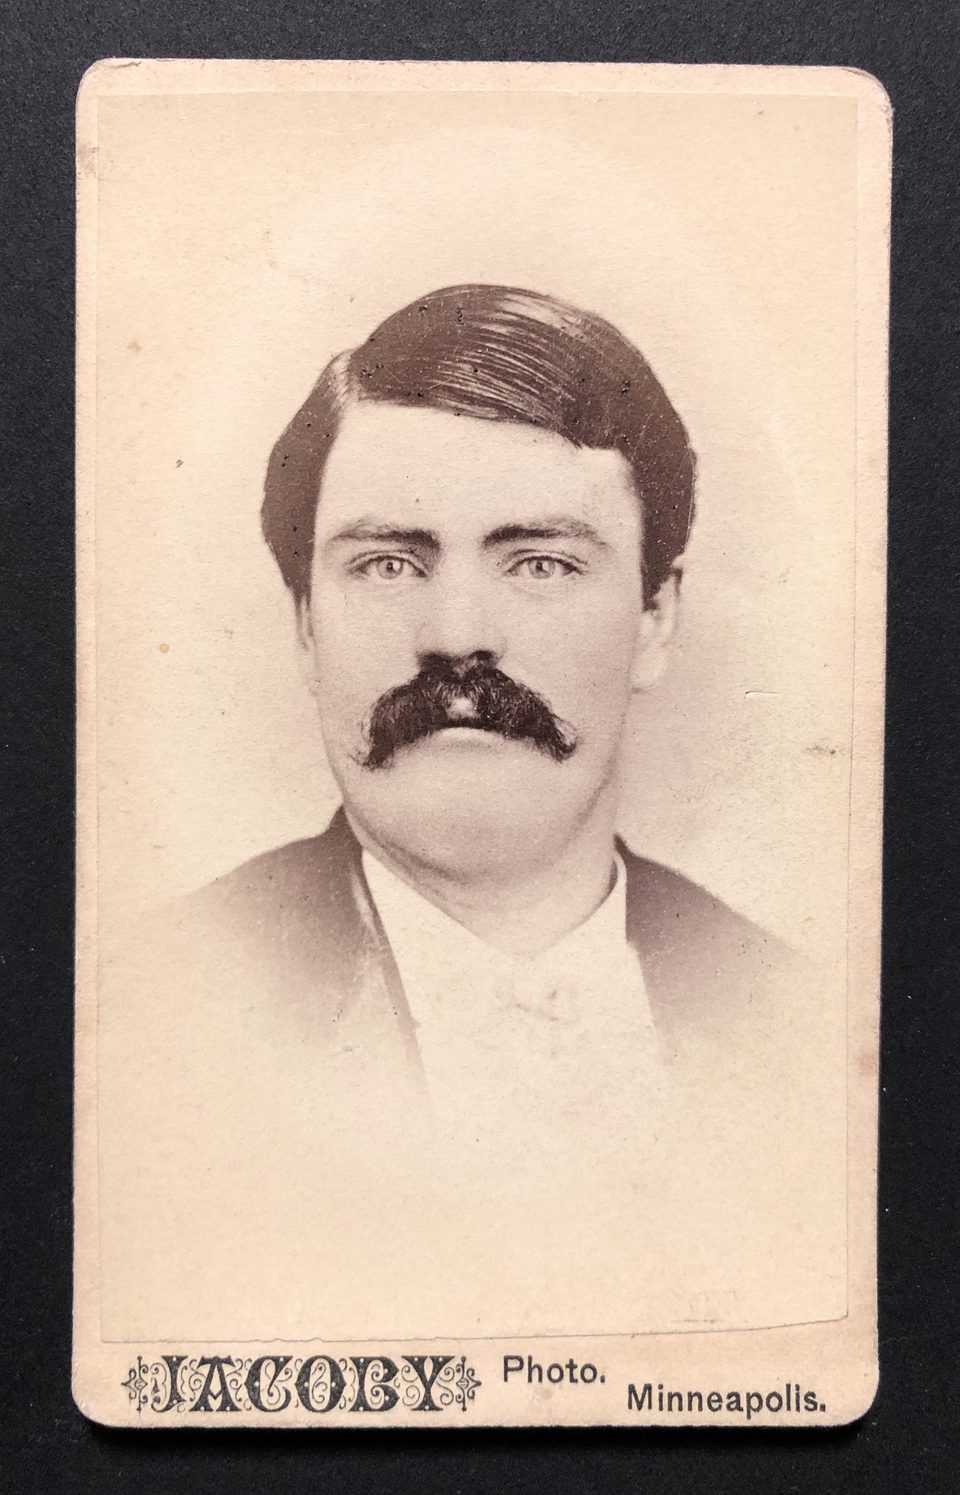 Carte de visite portrait of a man with a thick mustache. In this portrait, the edges vignette away to white. The photographer's name appears on the front, with the verso blank.